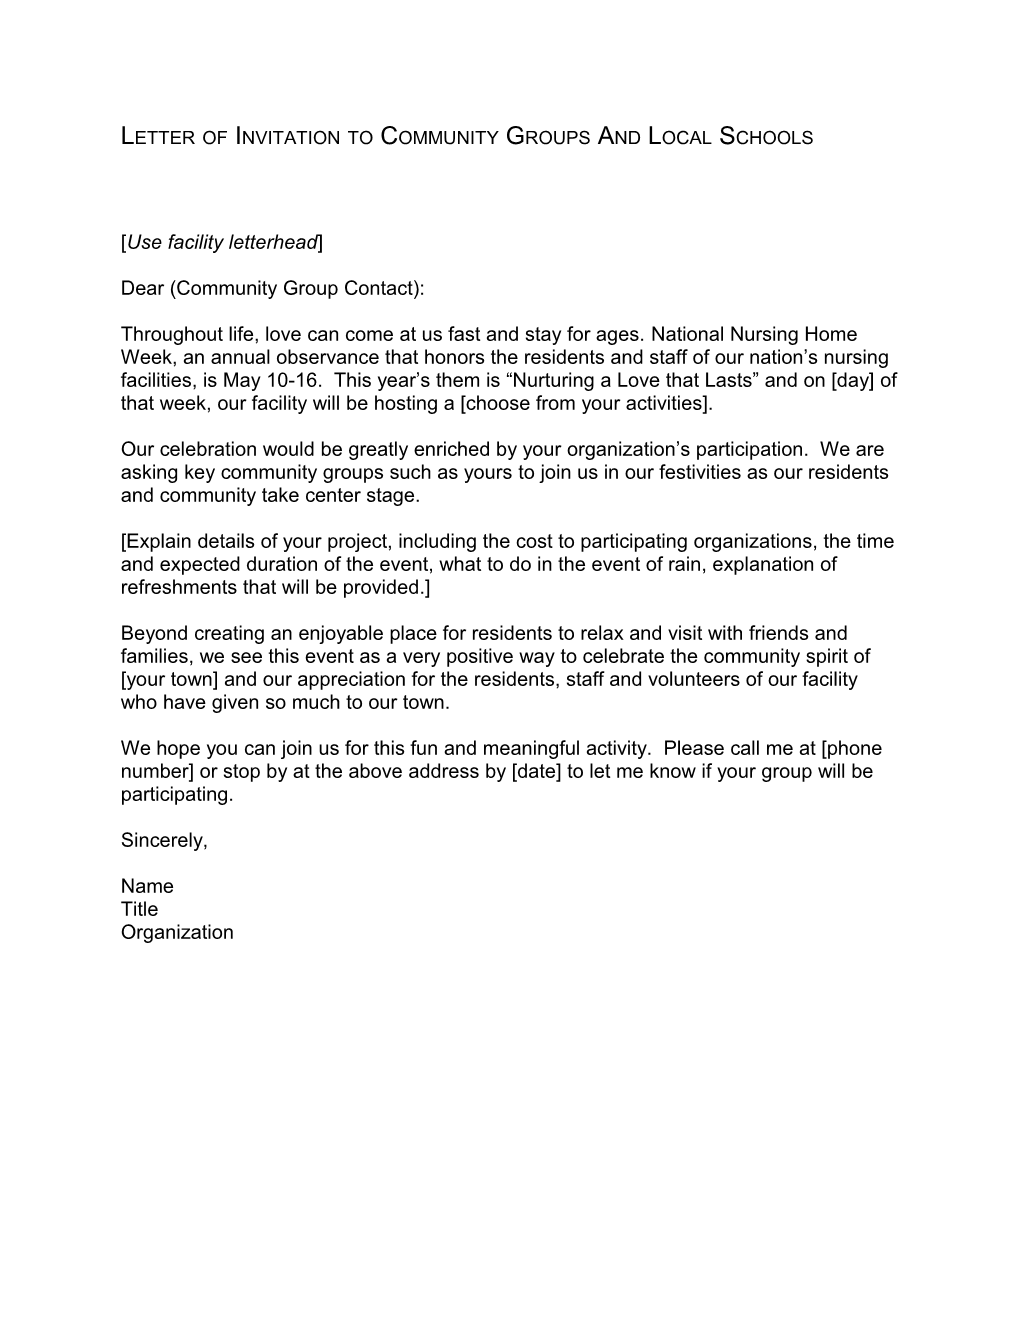 Sample Letter Of Invitation To Community Groups